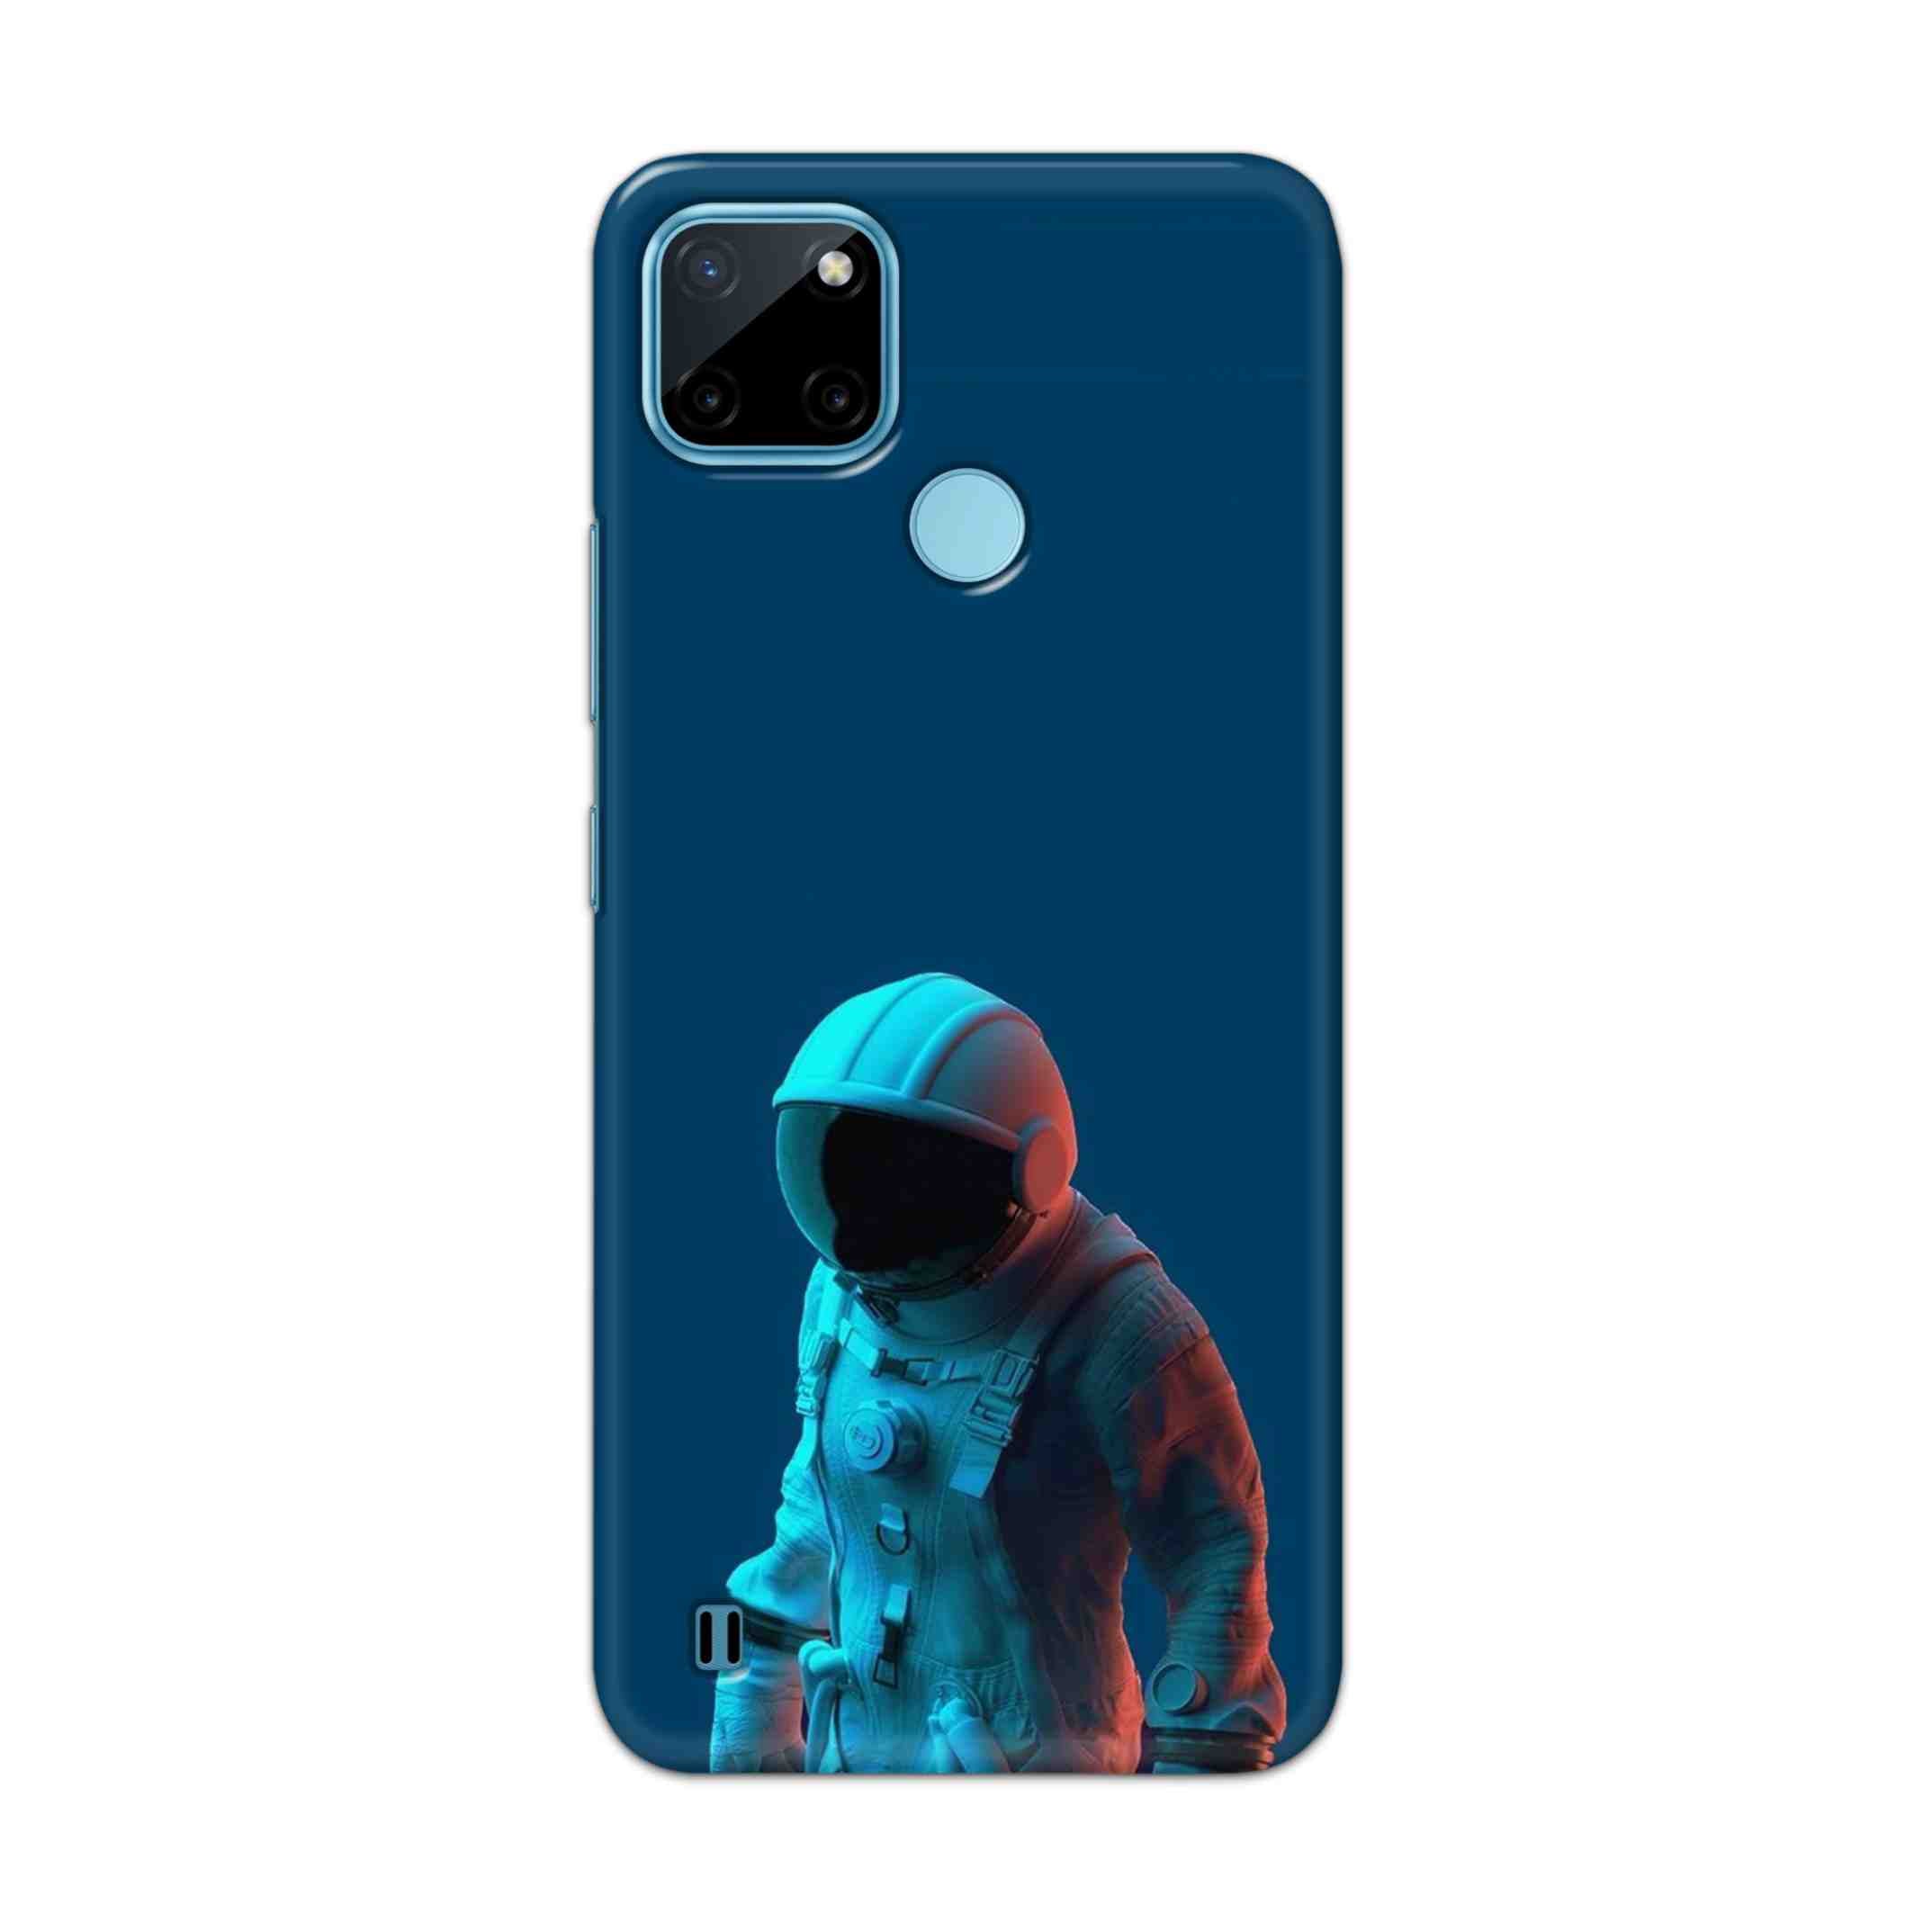 Buy Blue Astronaut Hard Back Mobile Phone Case Cover For Realme C21Y Online